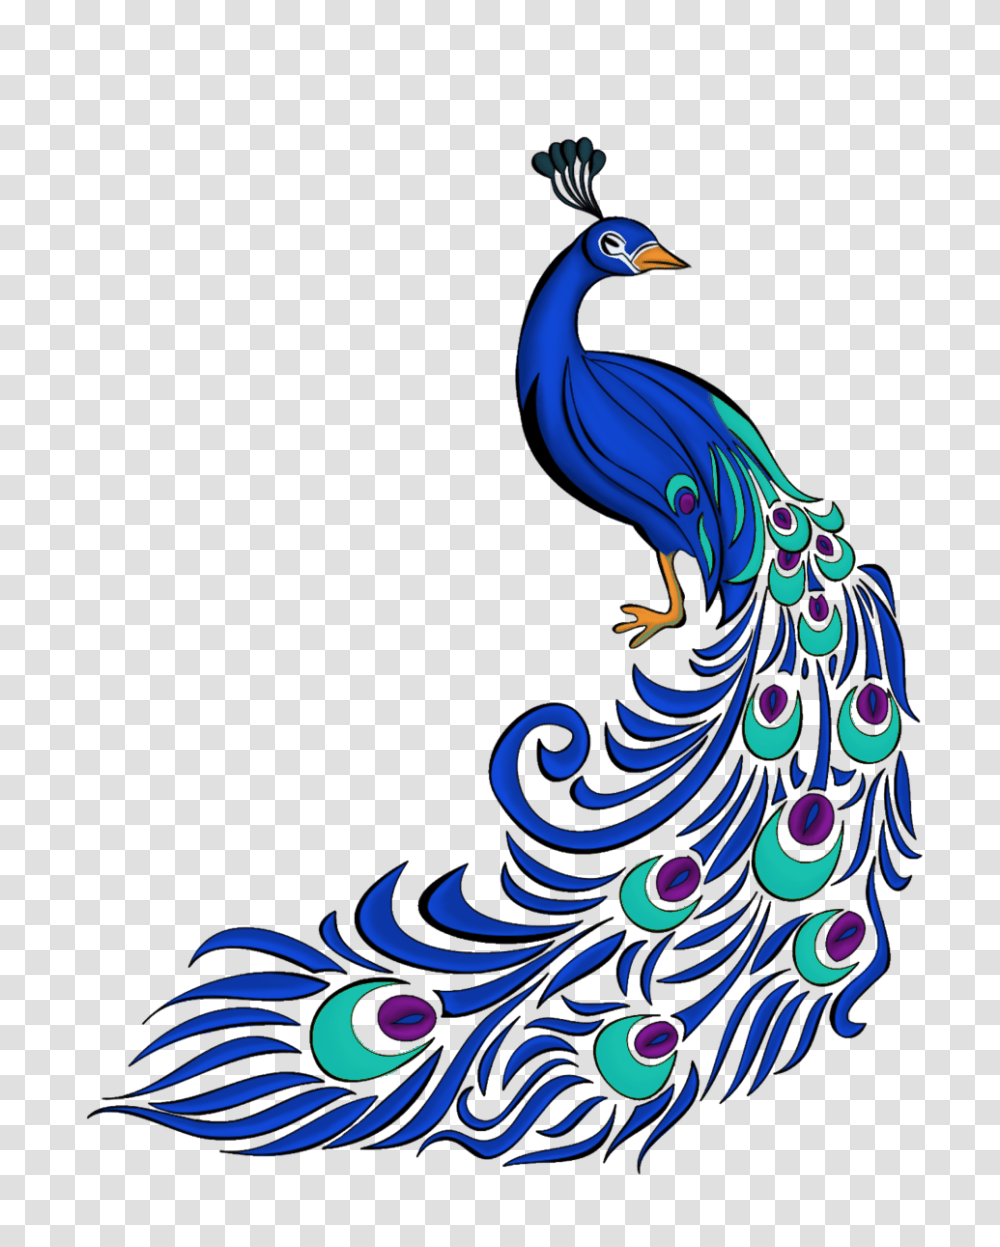 Background For Printables Party, Bird, Animal, Peacock Transparent Png